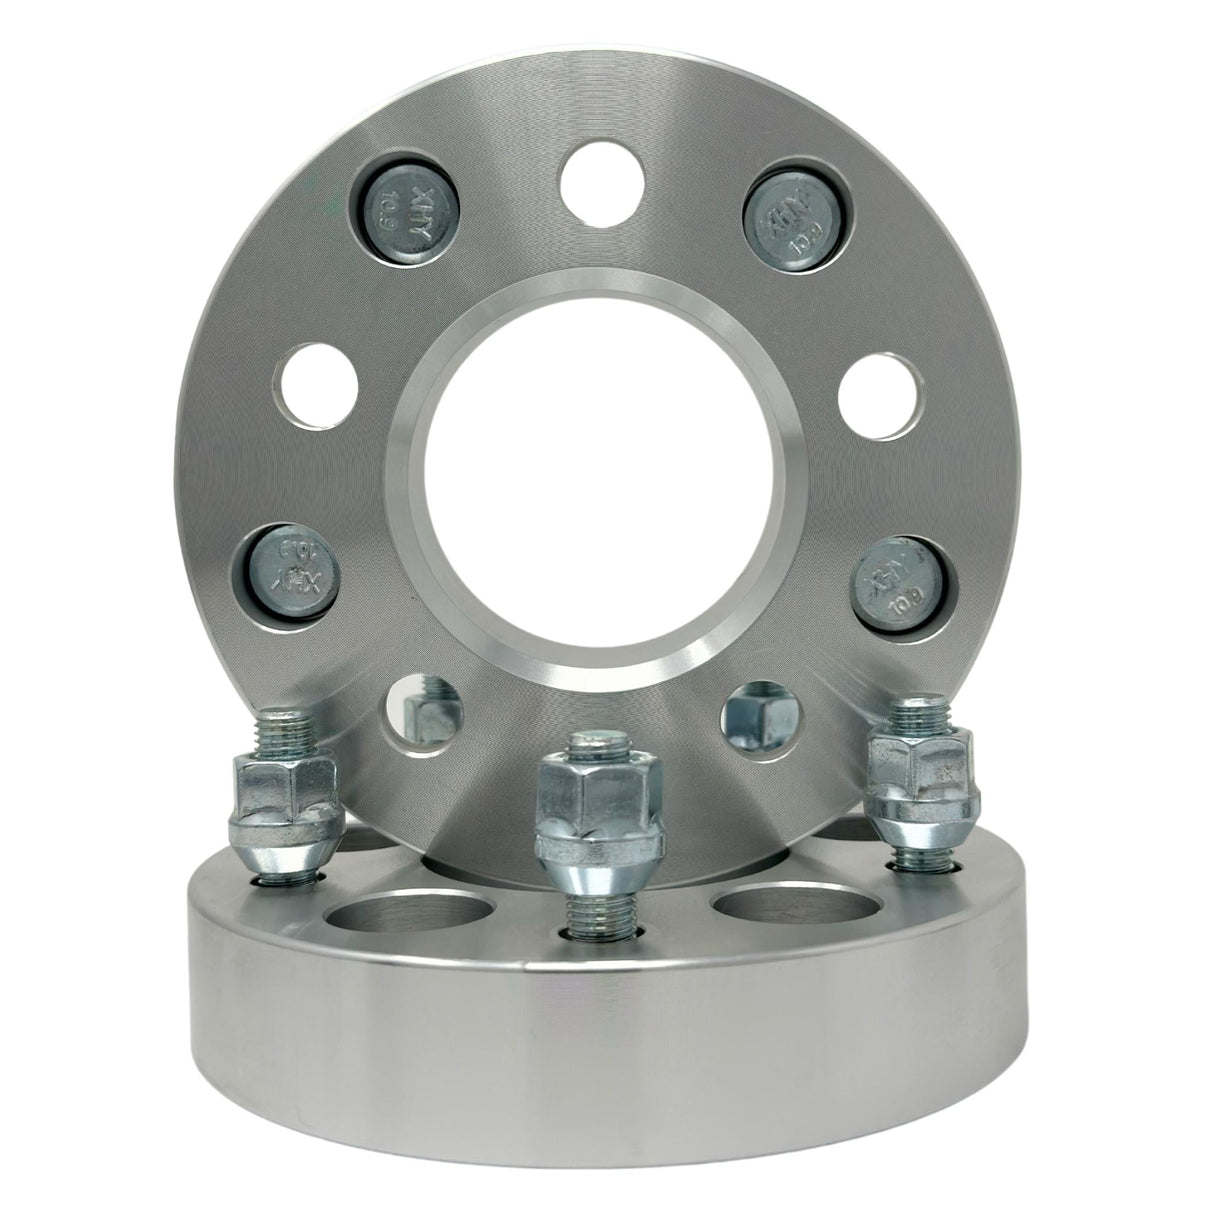 USA Made 5x4.75" to 5x120 Hub Centric Wheel Adapter 1"-4" Inch (25-100mm) 1953-2019 Corvette 12x1.5 or 7/16" Lug Nuts 70.3mm Center Bore | Use 2020 & Newer Corvette Wheels with 14x1.5 OEM Stud Specs | 5x120.7 to 5x120 Adapters